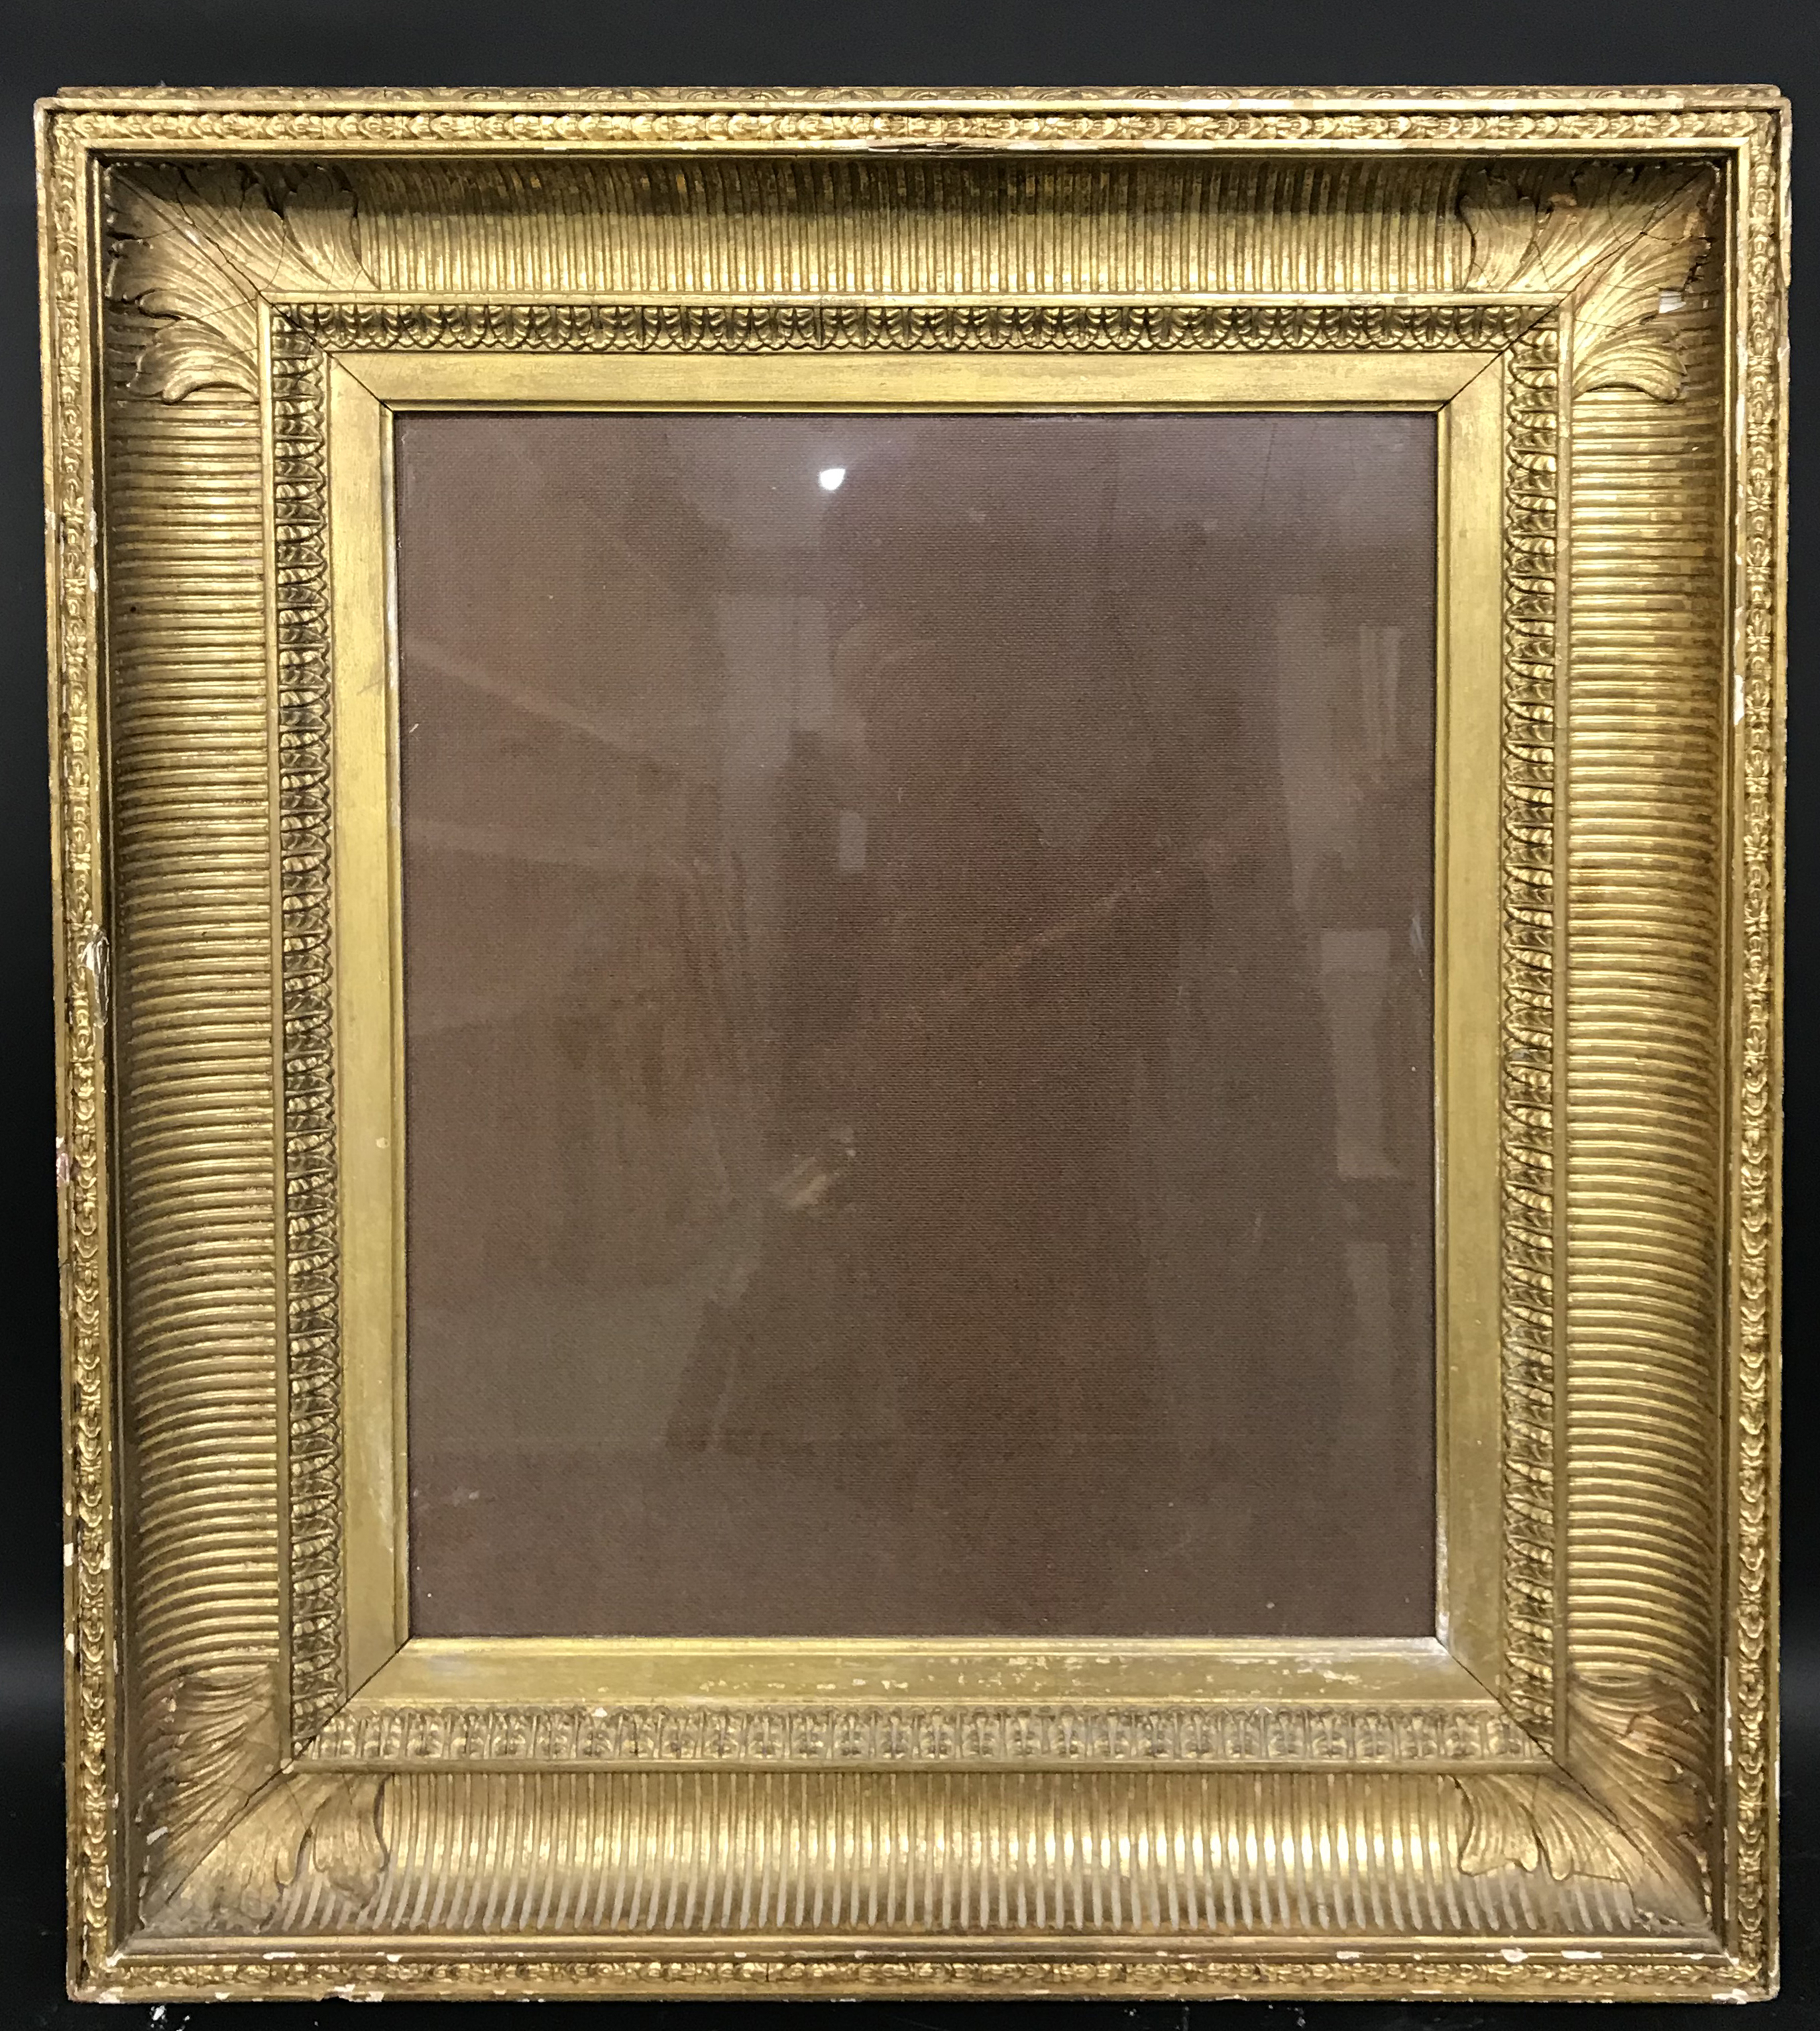 19th Century English School. A Gilt Composition Frame, with inset glass, 17.5" x 14" (rebate). - Image 2 of 3